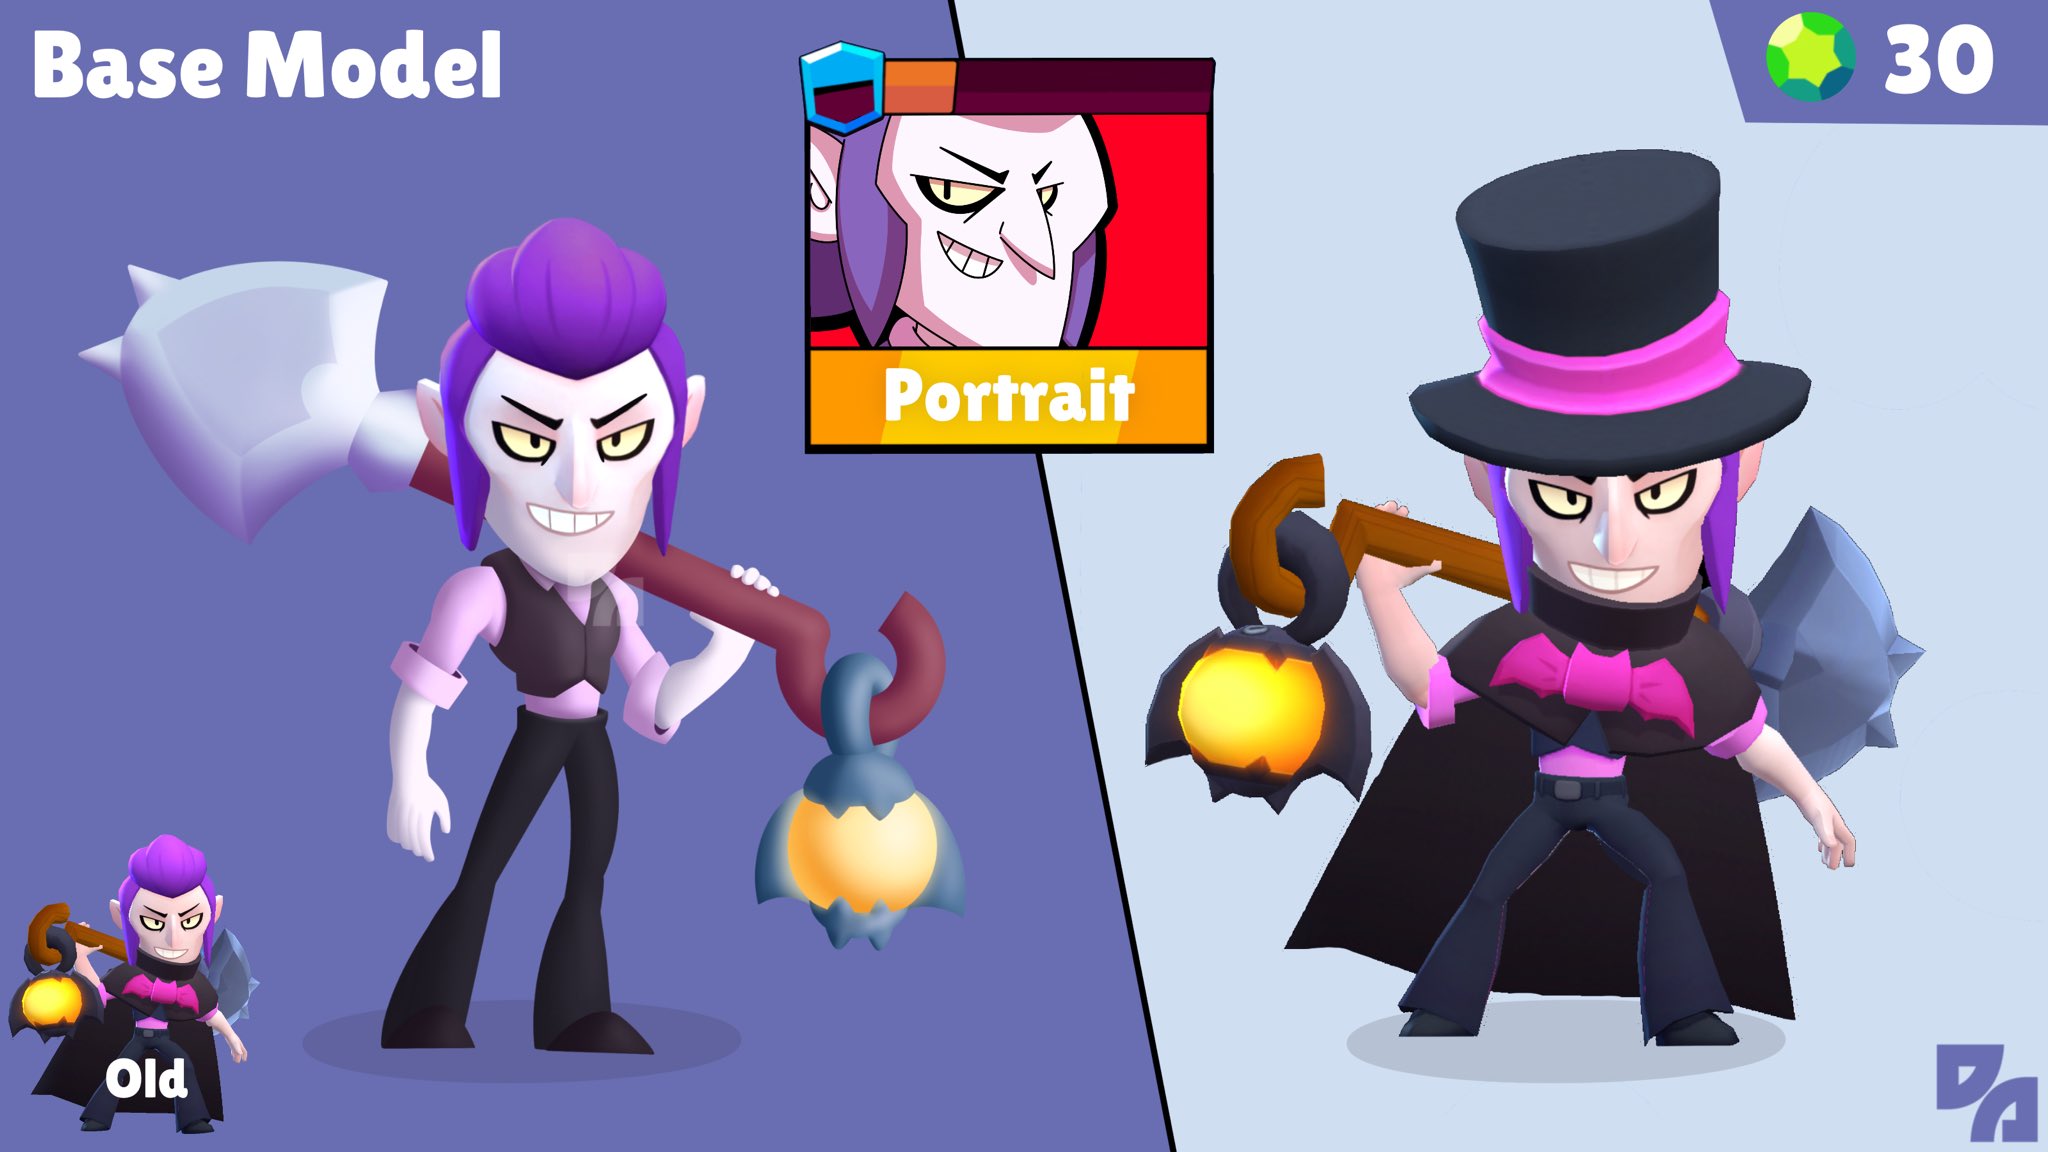 Dev Mortis Base Skin Change People Who Already Have Unlocked Mortis Keep Top Hat Skin New Players Will Be Able To Purchase It For 30 Gems Some Adjustments To Model